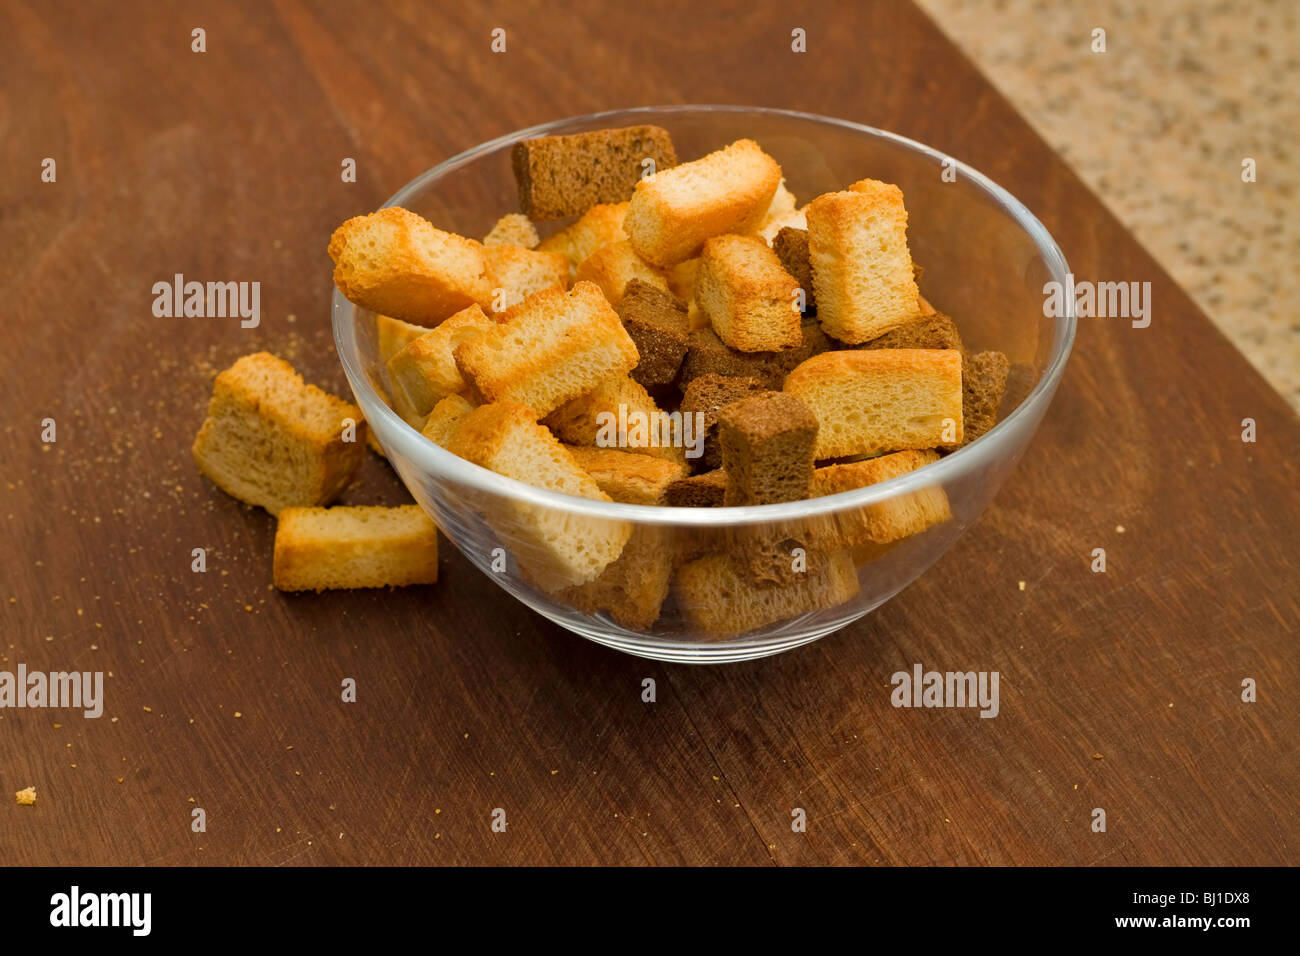 A bowl of salad croutons Stock Photo